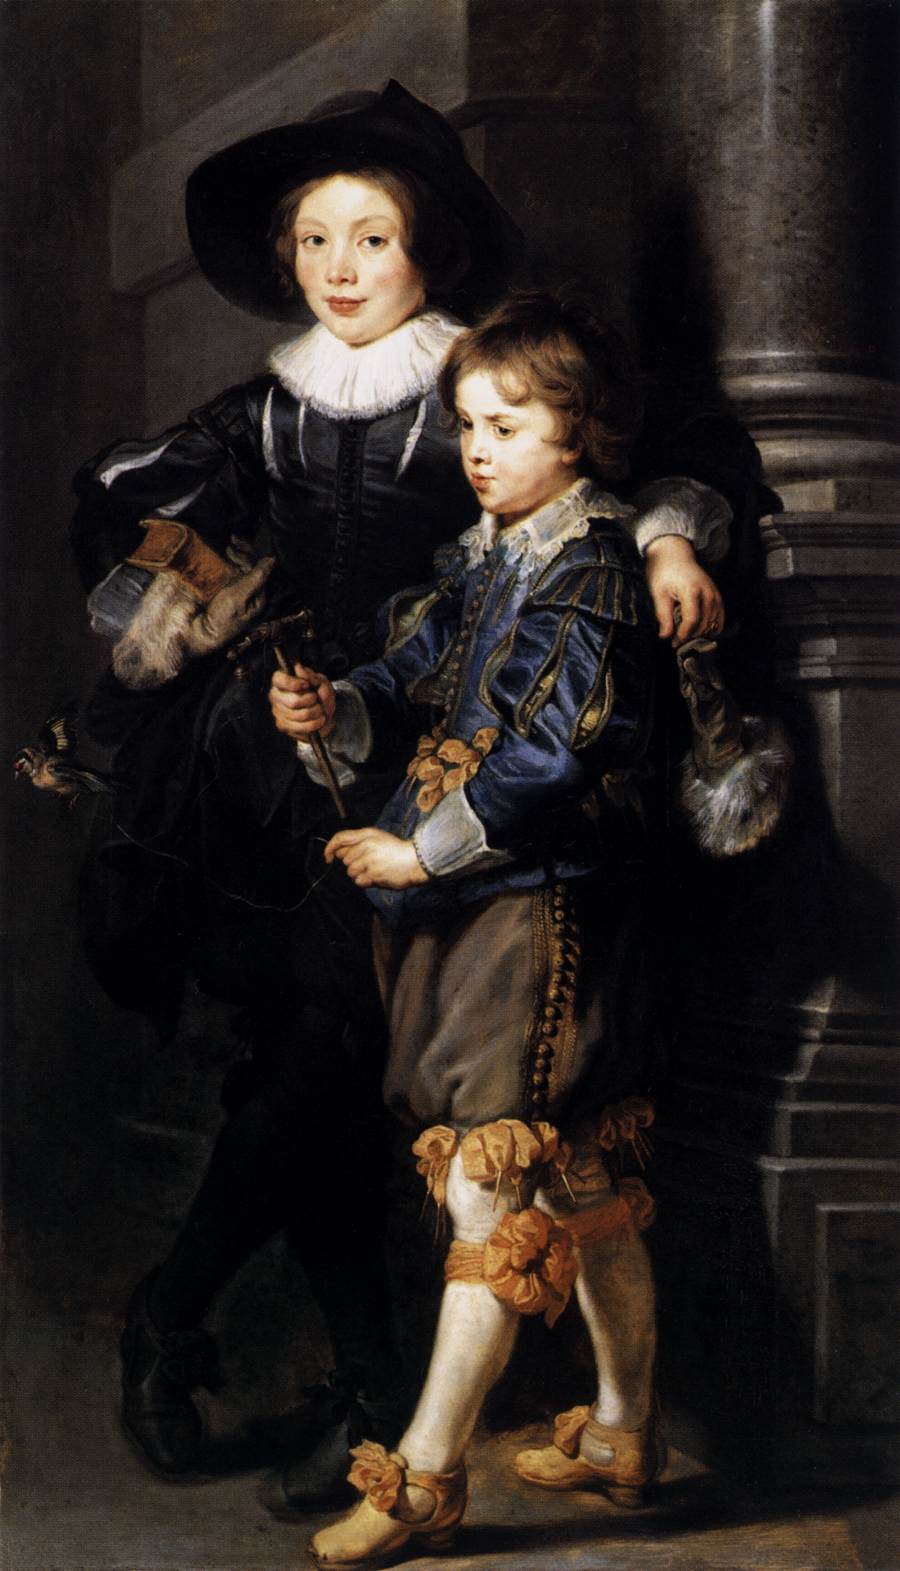 Albert and Nicolaas Rubens by Peter Paul Rubens Reproduction Oil Painting on Canvas